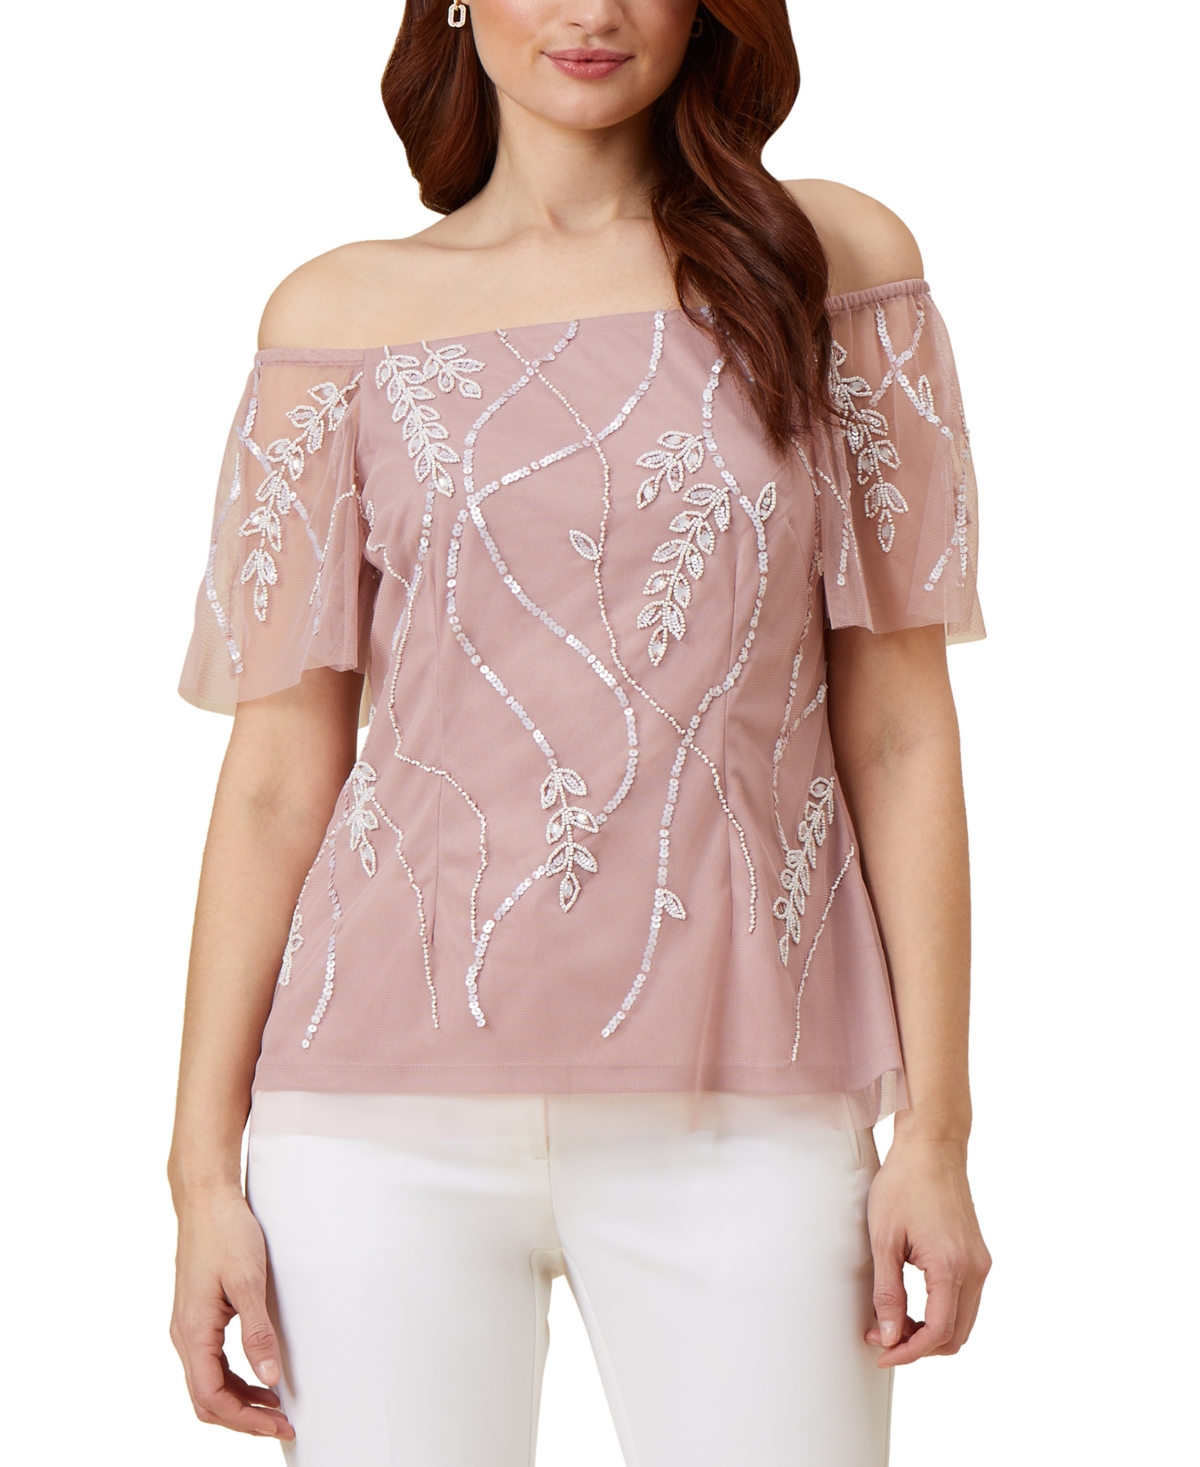  Adrianna Papell Women's Beaded Off-The-Shoulder Top